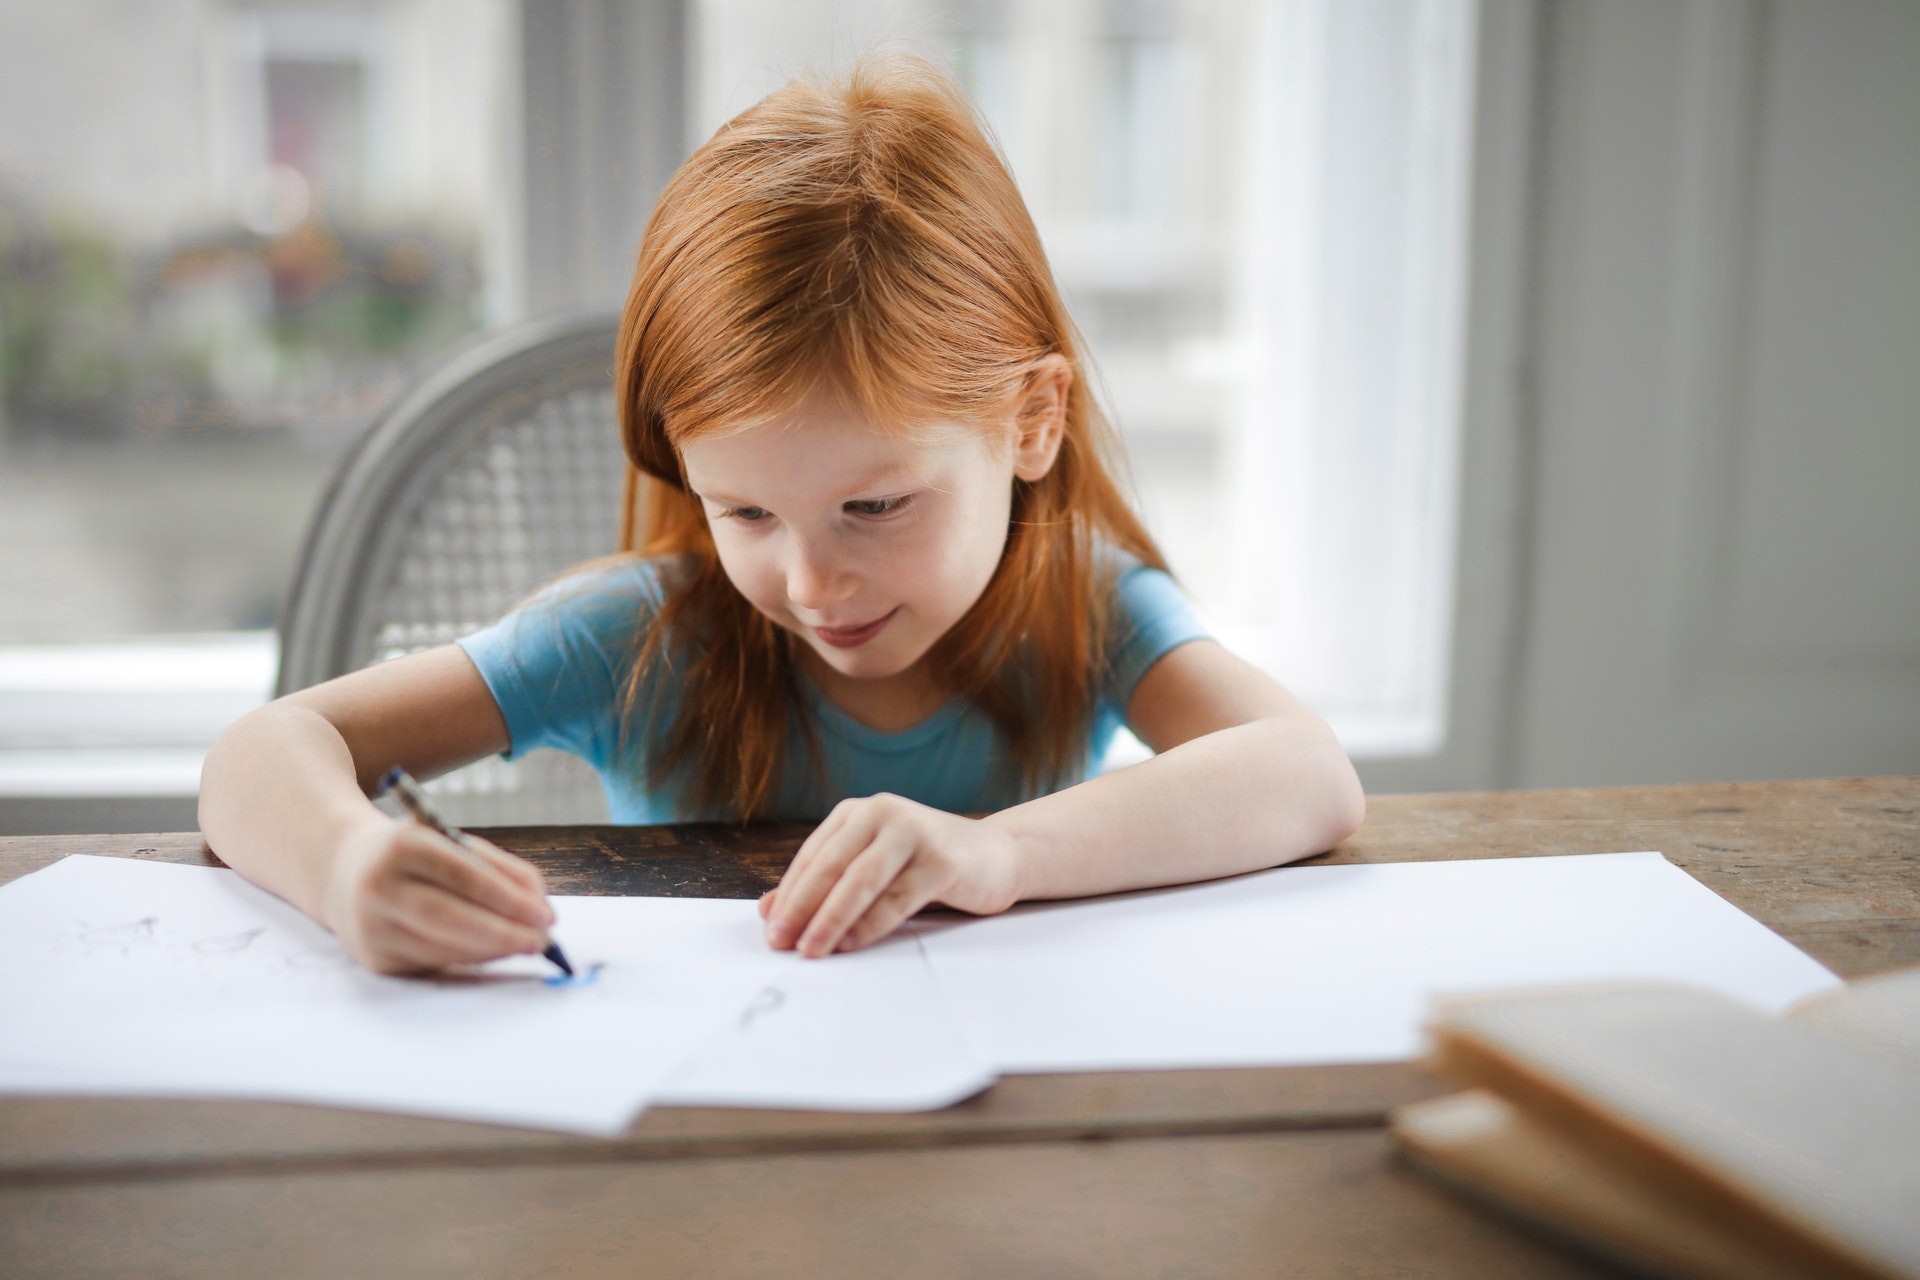 Young child sits at a table in front of a window while writing on a sheet of paper. 